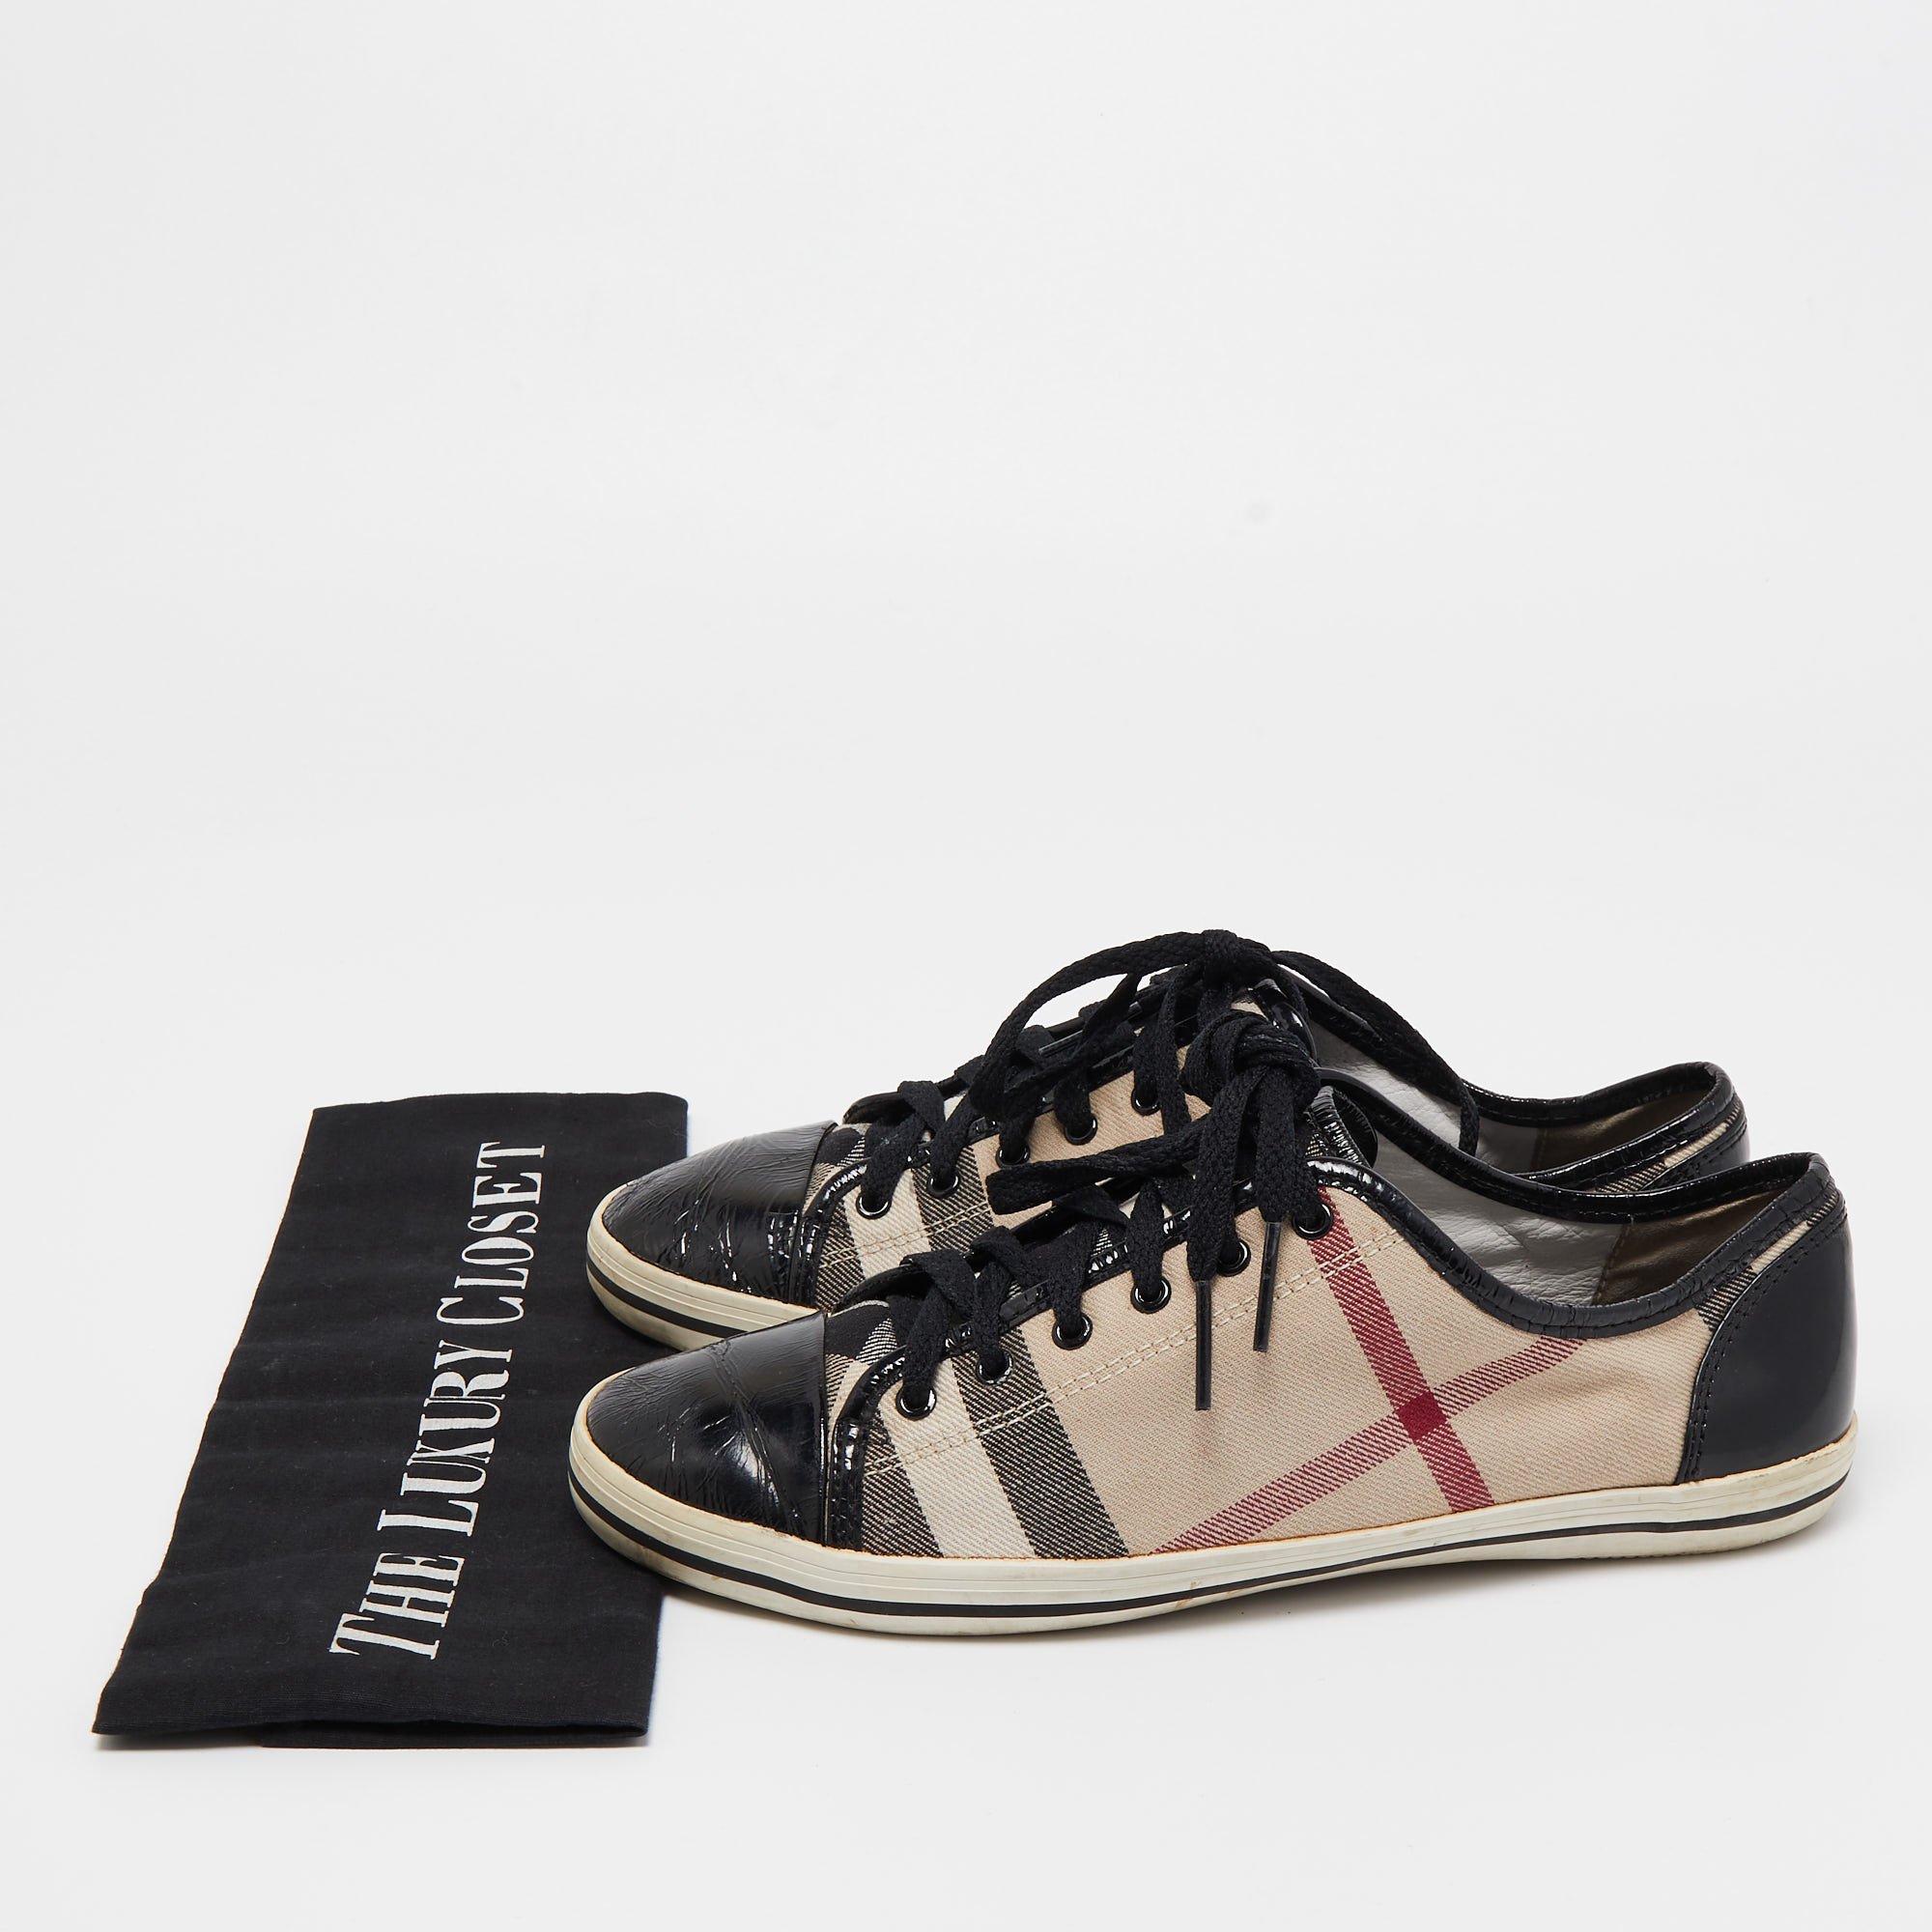 Burberry Black/Beige Novacheck Canvas And Leather Cap Toe Low Top Sneakers Size 39